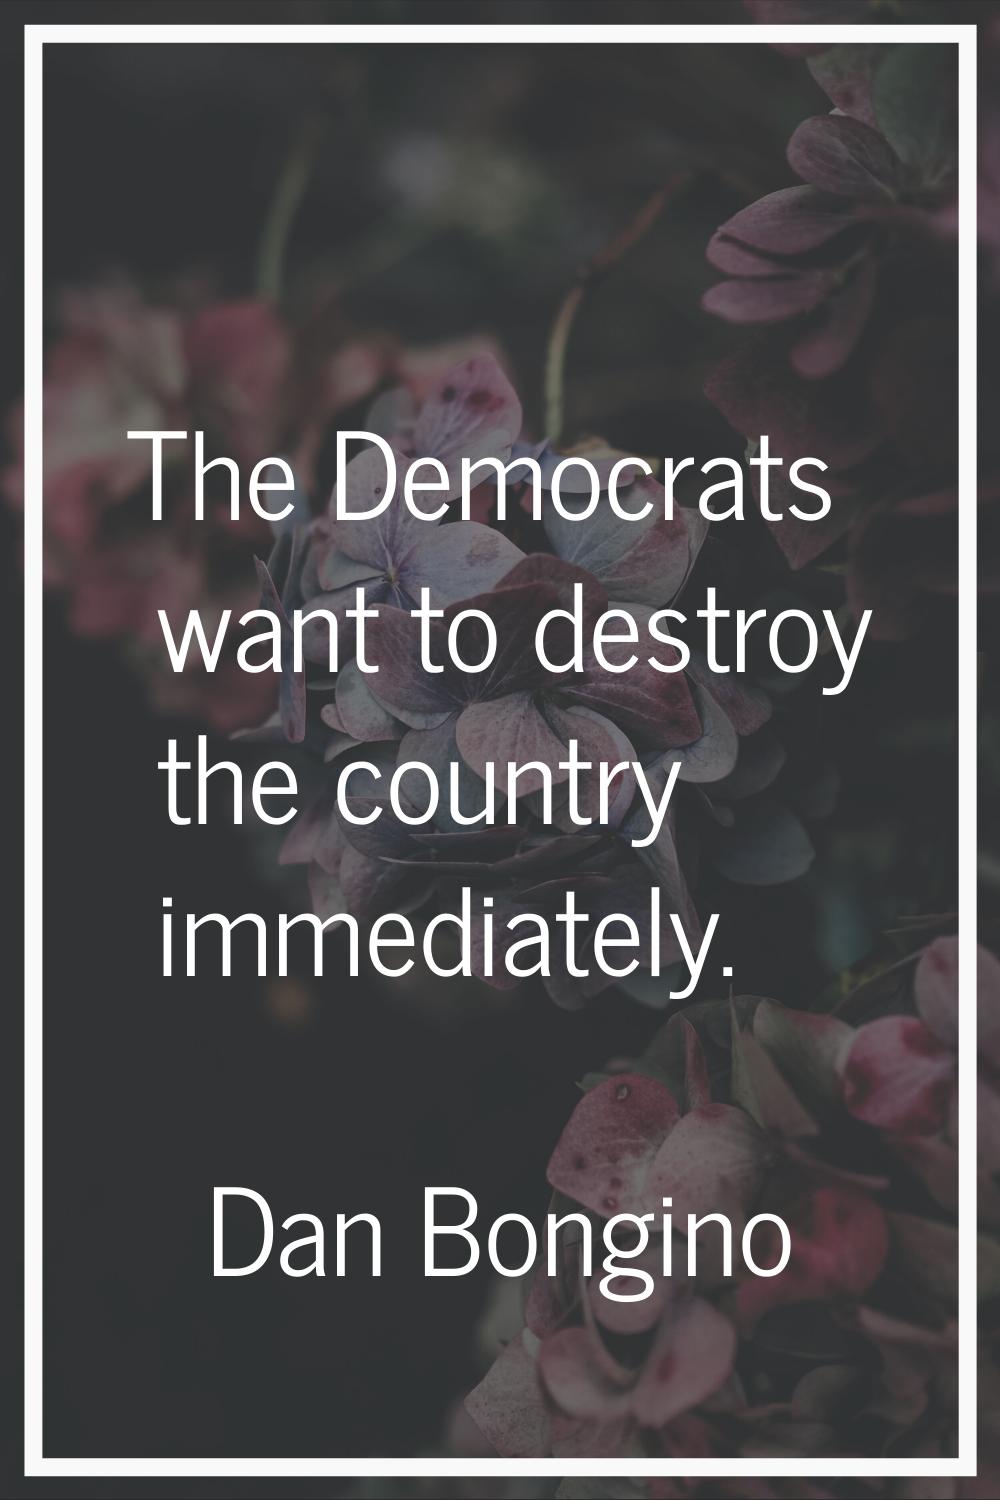 The Democrats want to destroy the country immediately.